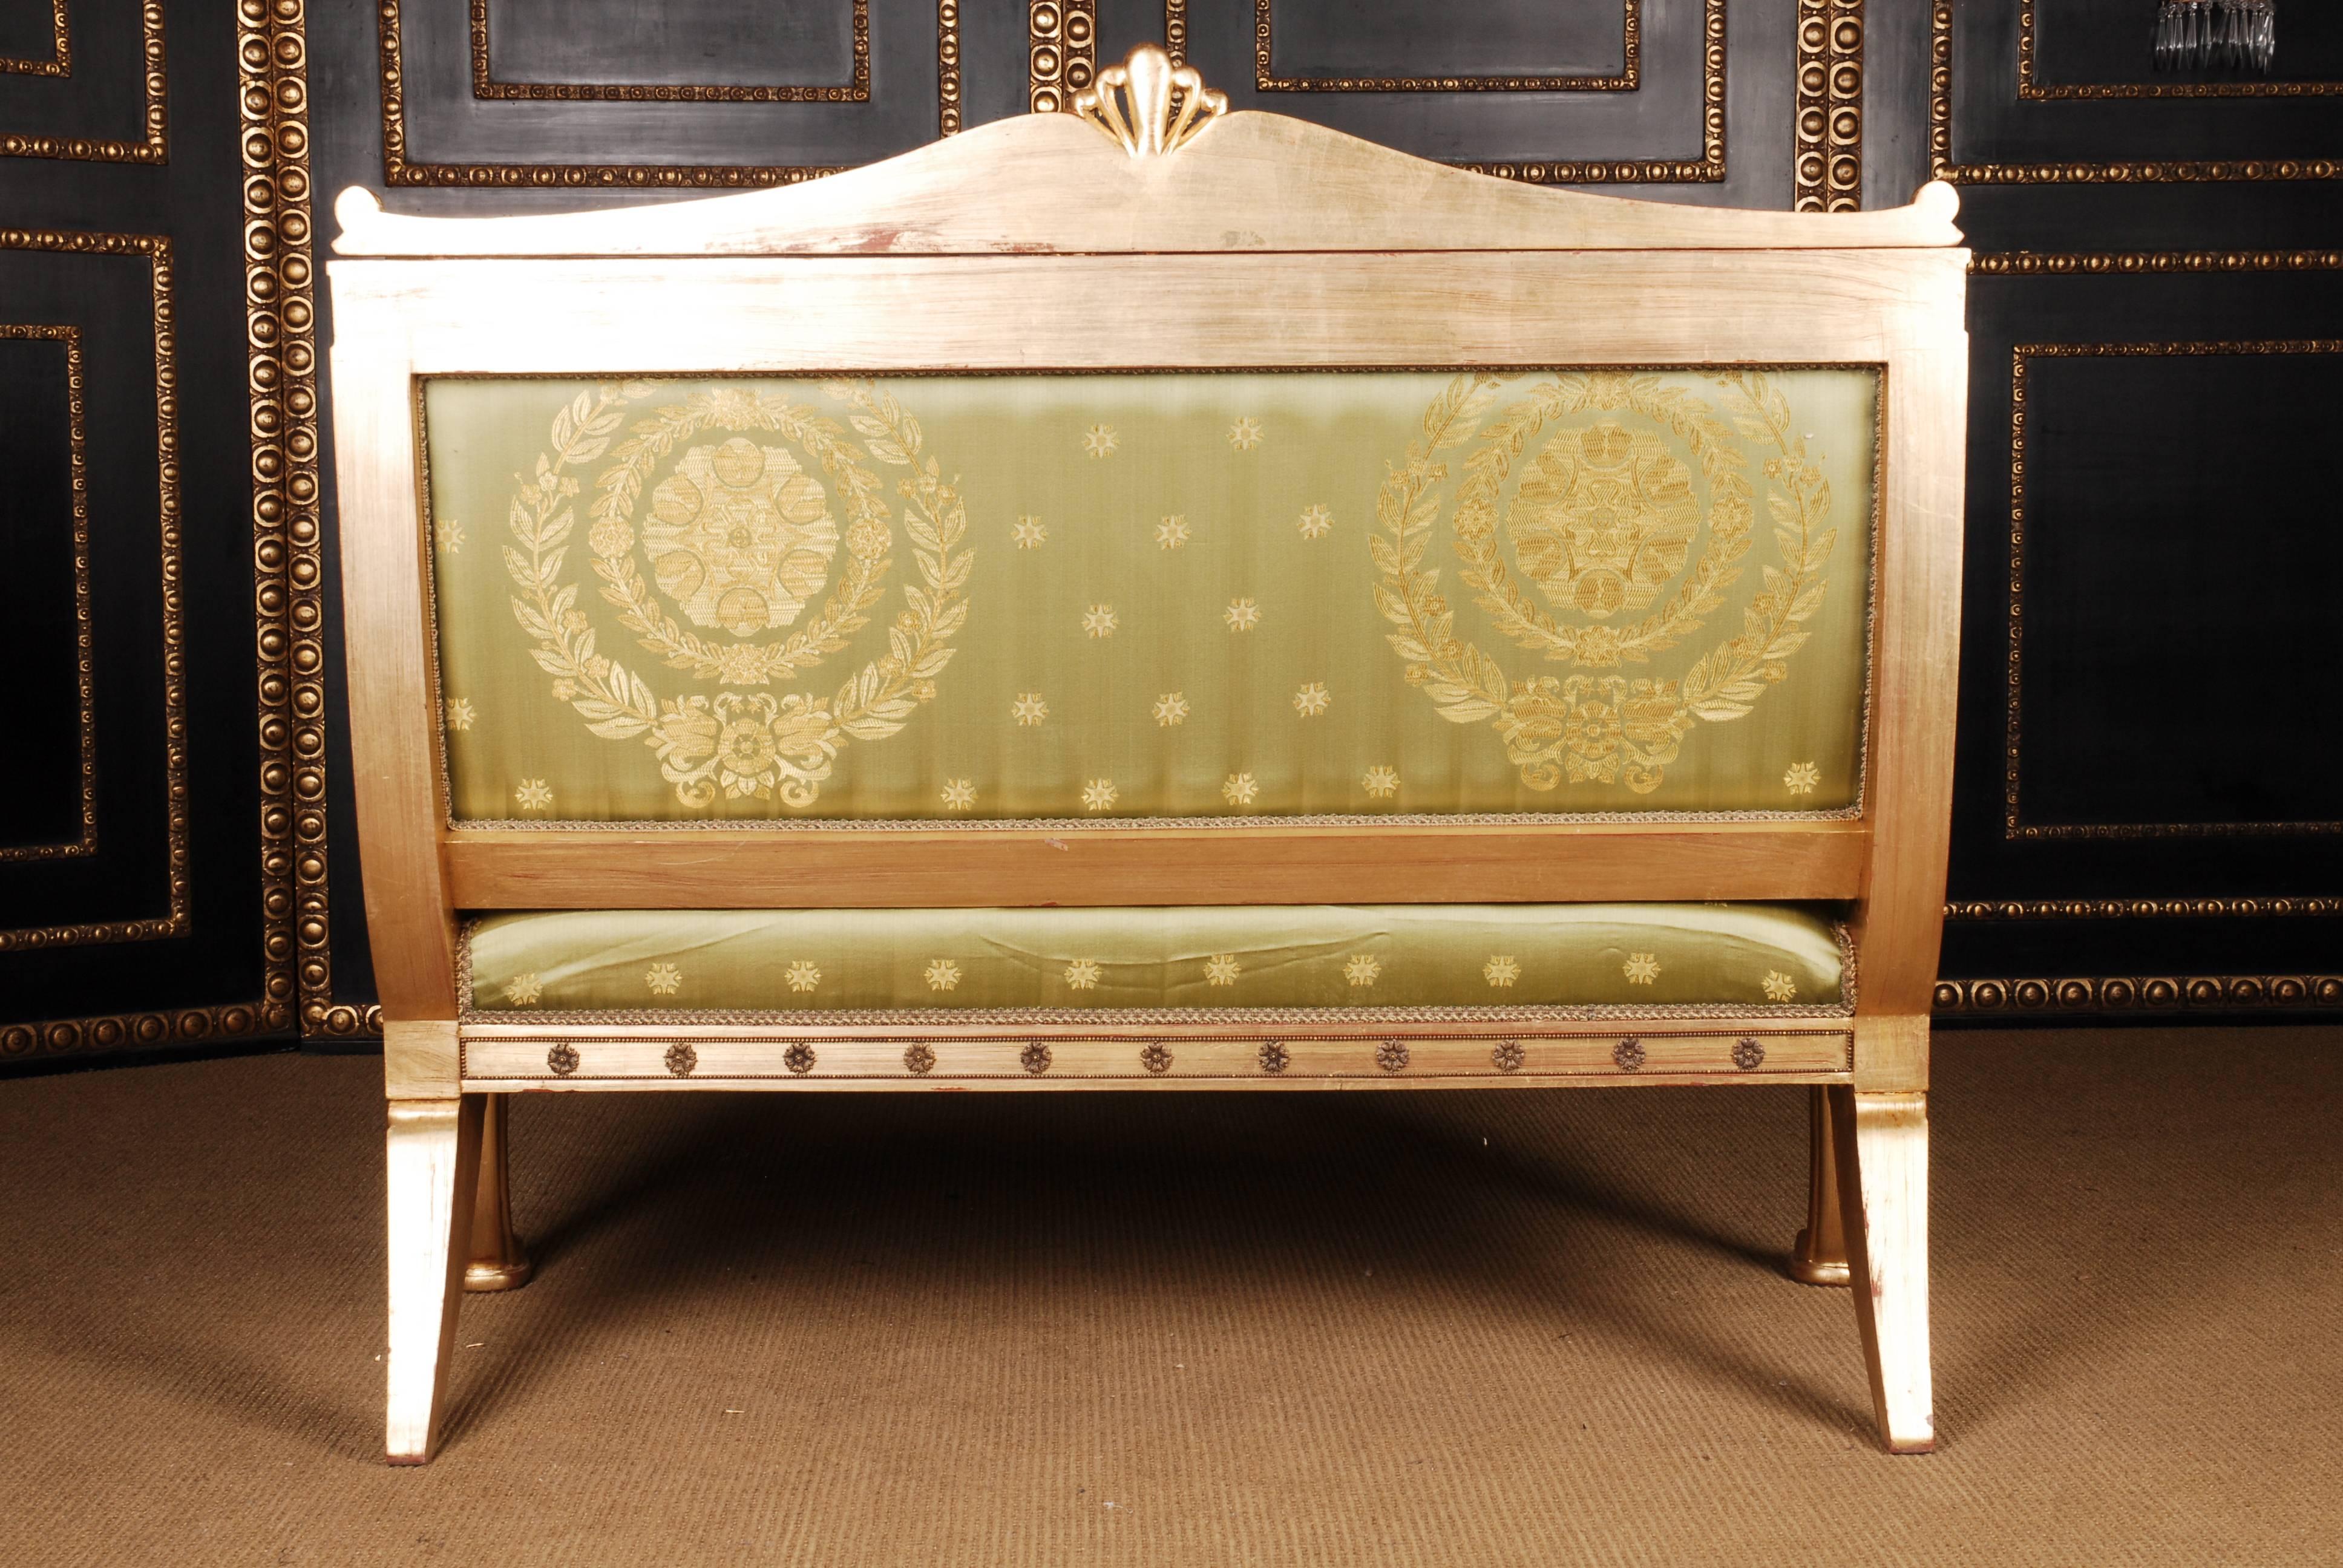 20th Century Imperial Stylish Lion Salon Couch in Empire Style